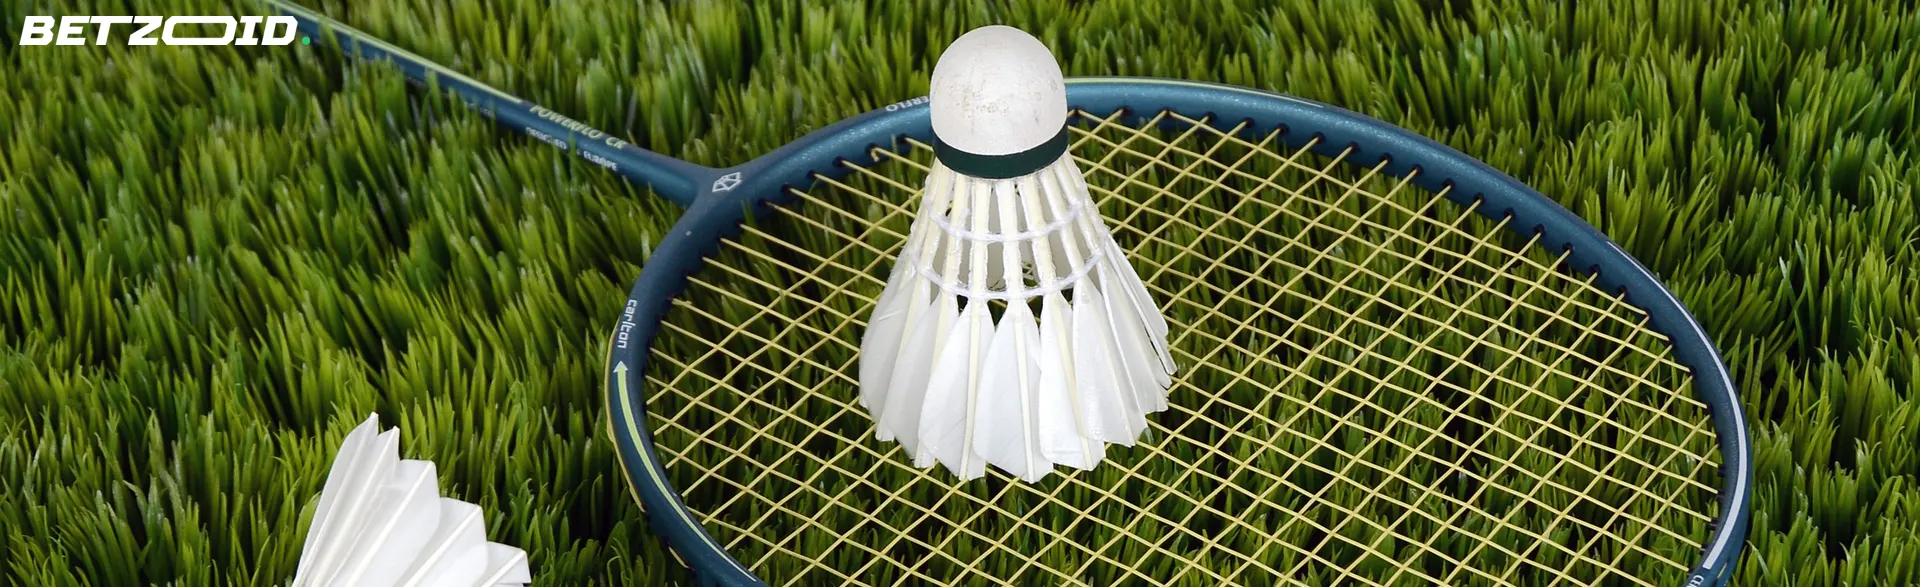 Badminton racket and shuttlecock on artificial grass, representing the variety of sports available for betting on websites in Canada.